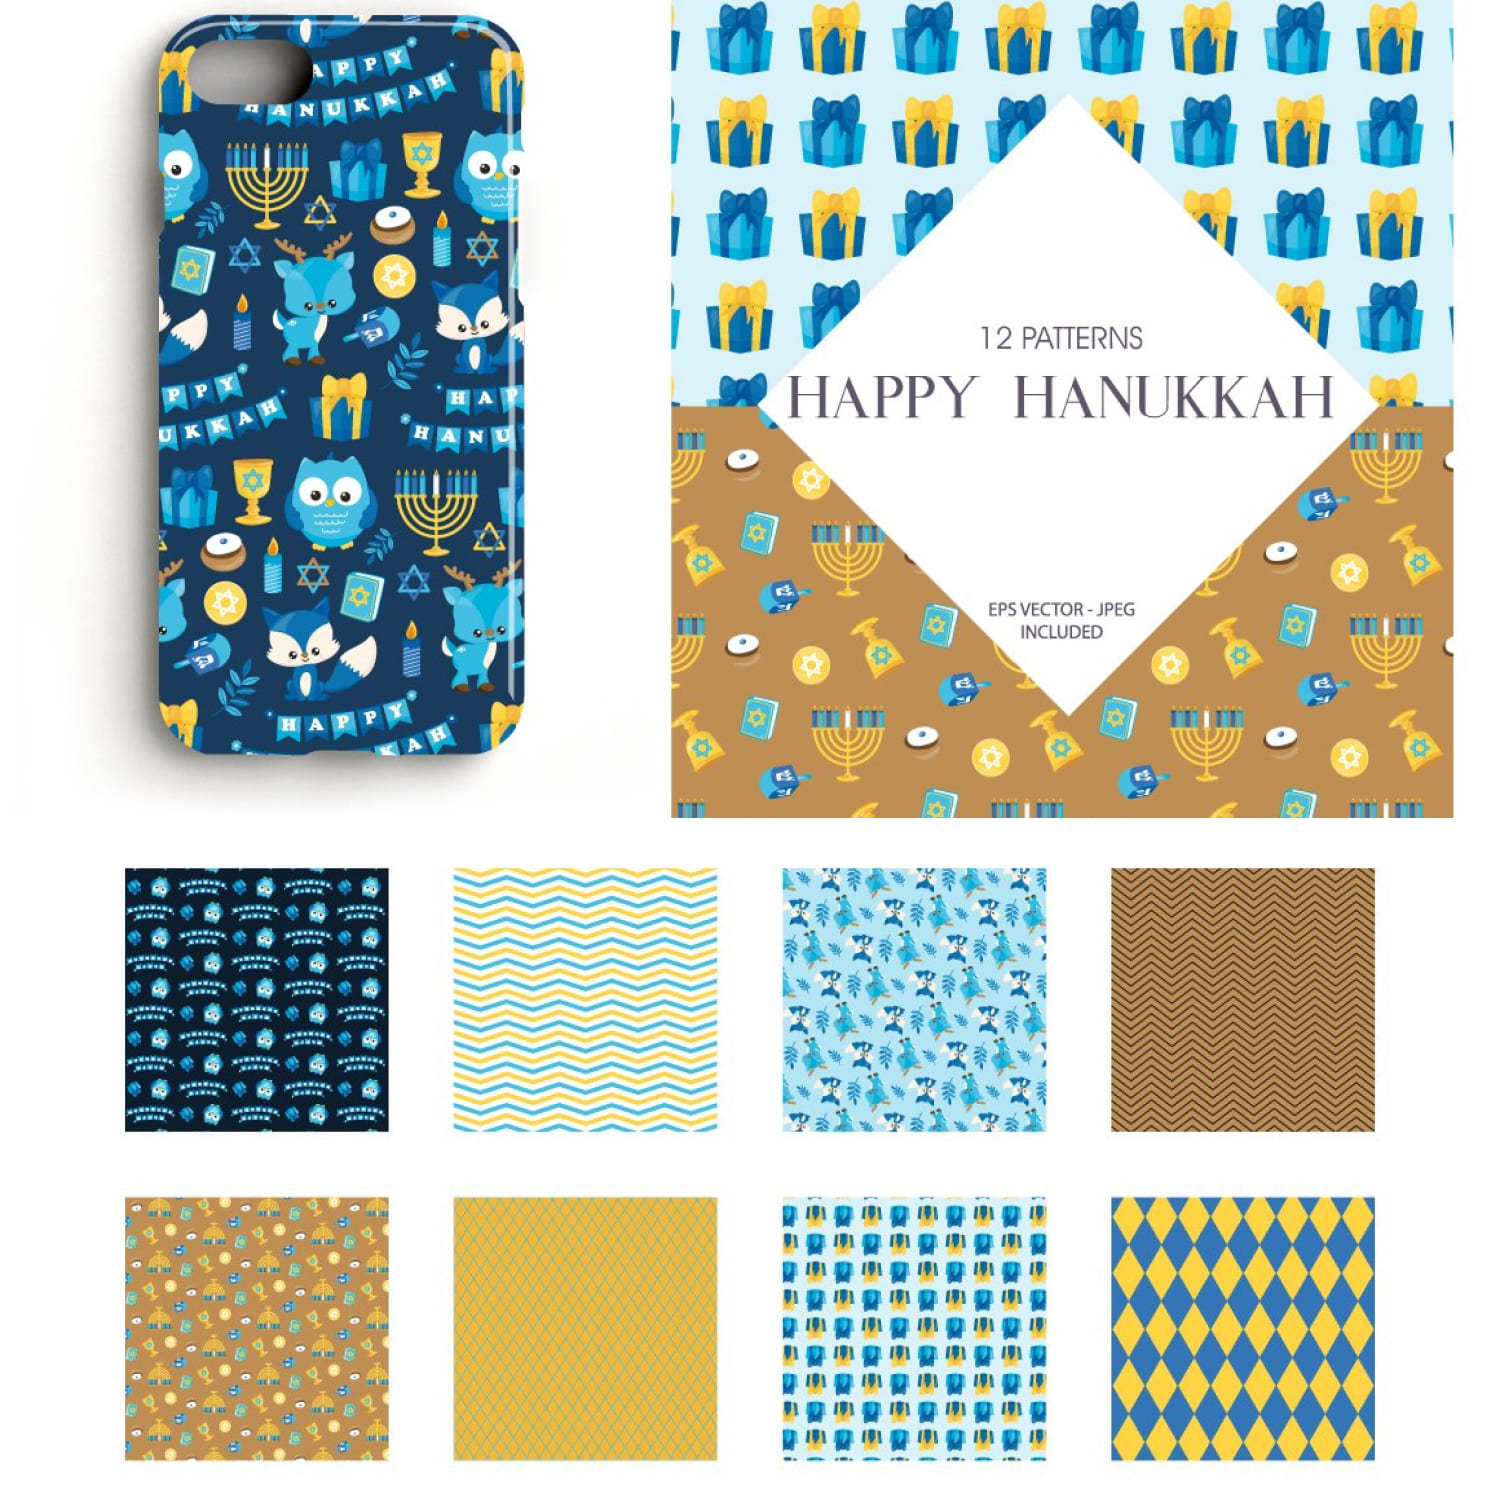 Preview happy hanukkah papers graphic illustration.